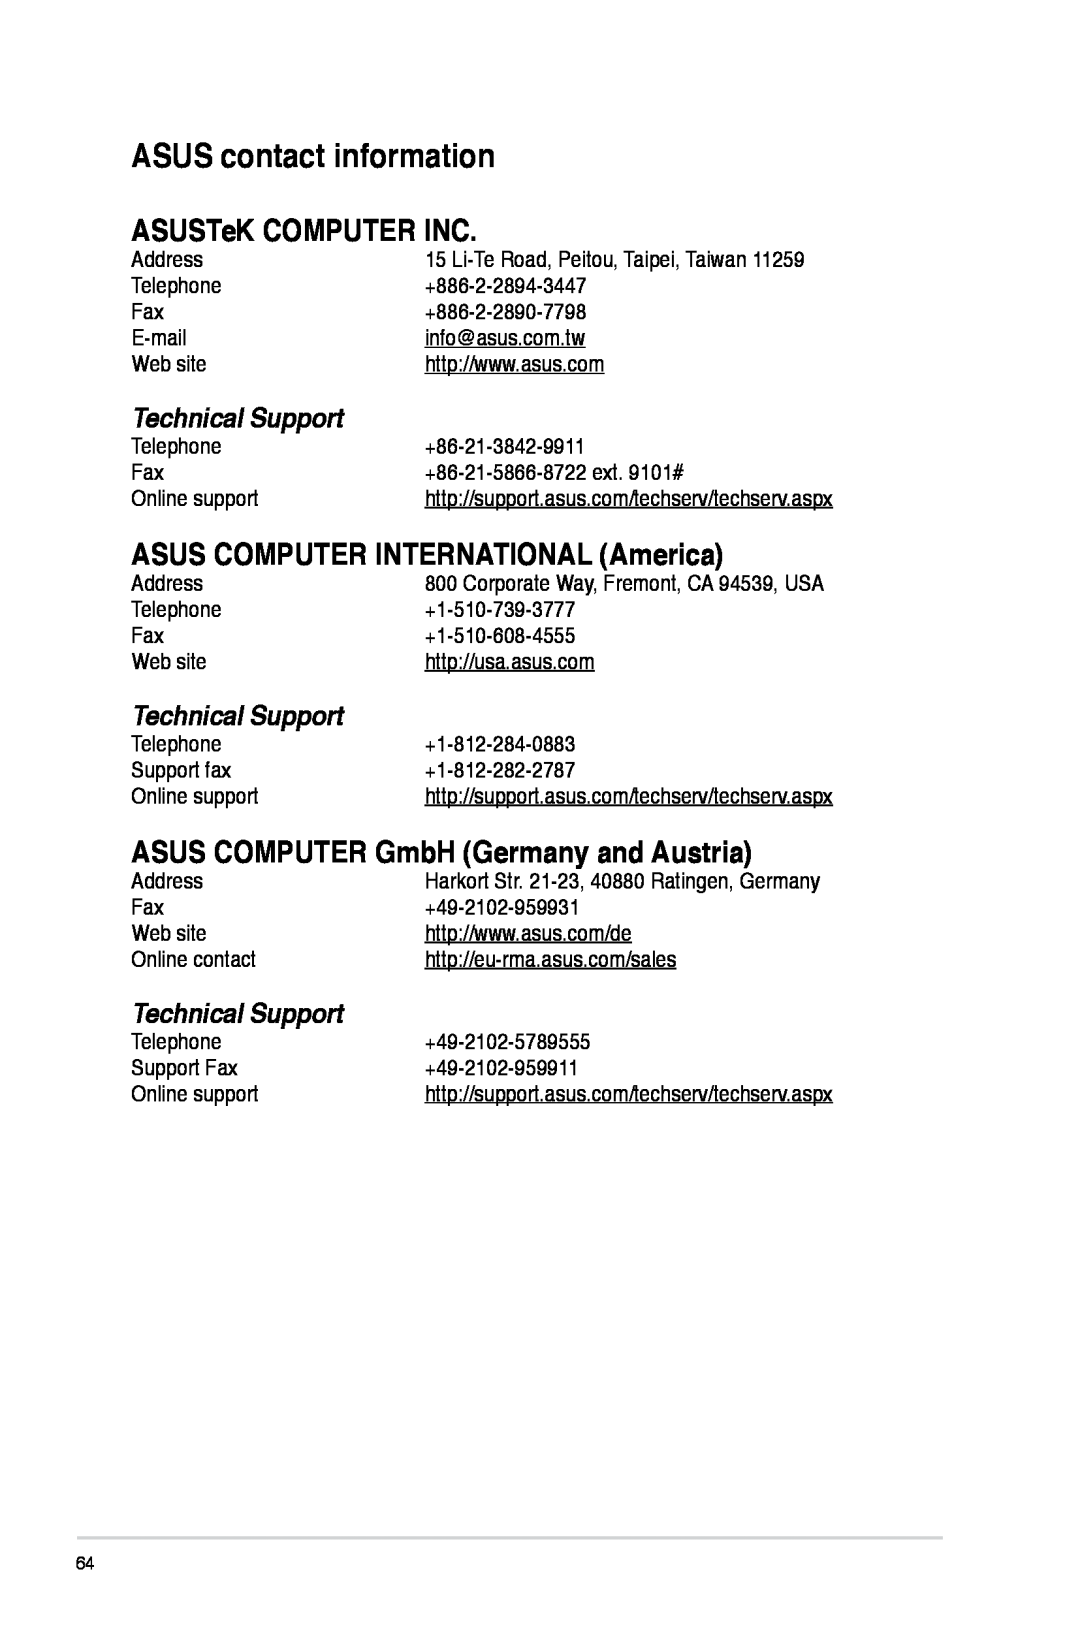 Asus M51ACUS002S ASUS contact information, ASUSTeK COMPUTER INC, ASUS COMPUTER INTERNATIONAL America, Technical Support 